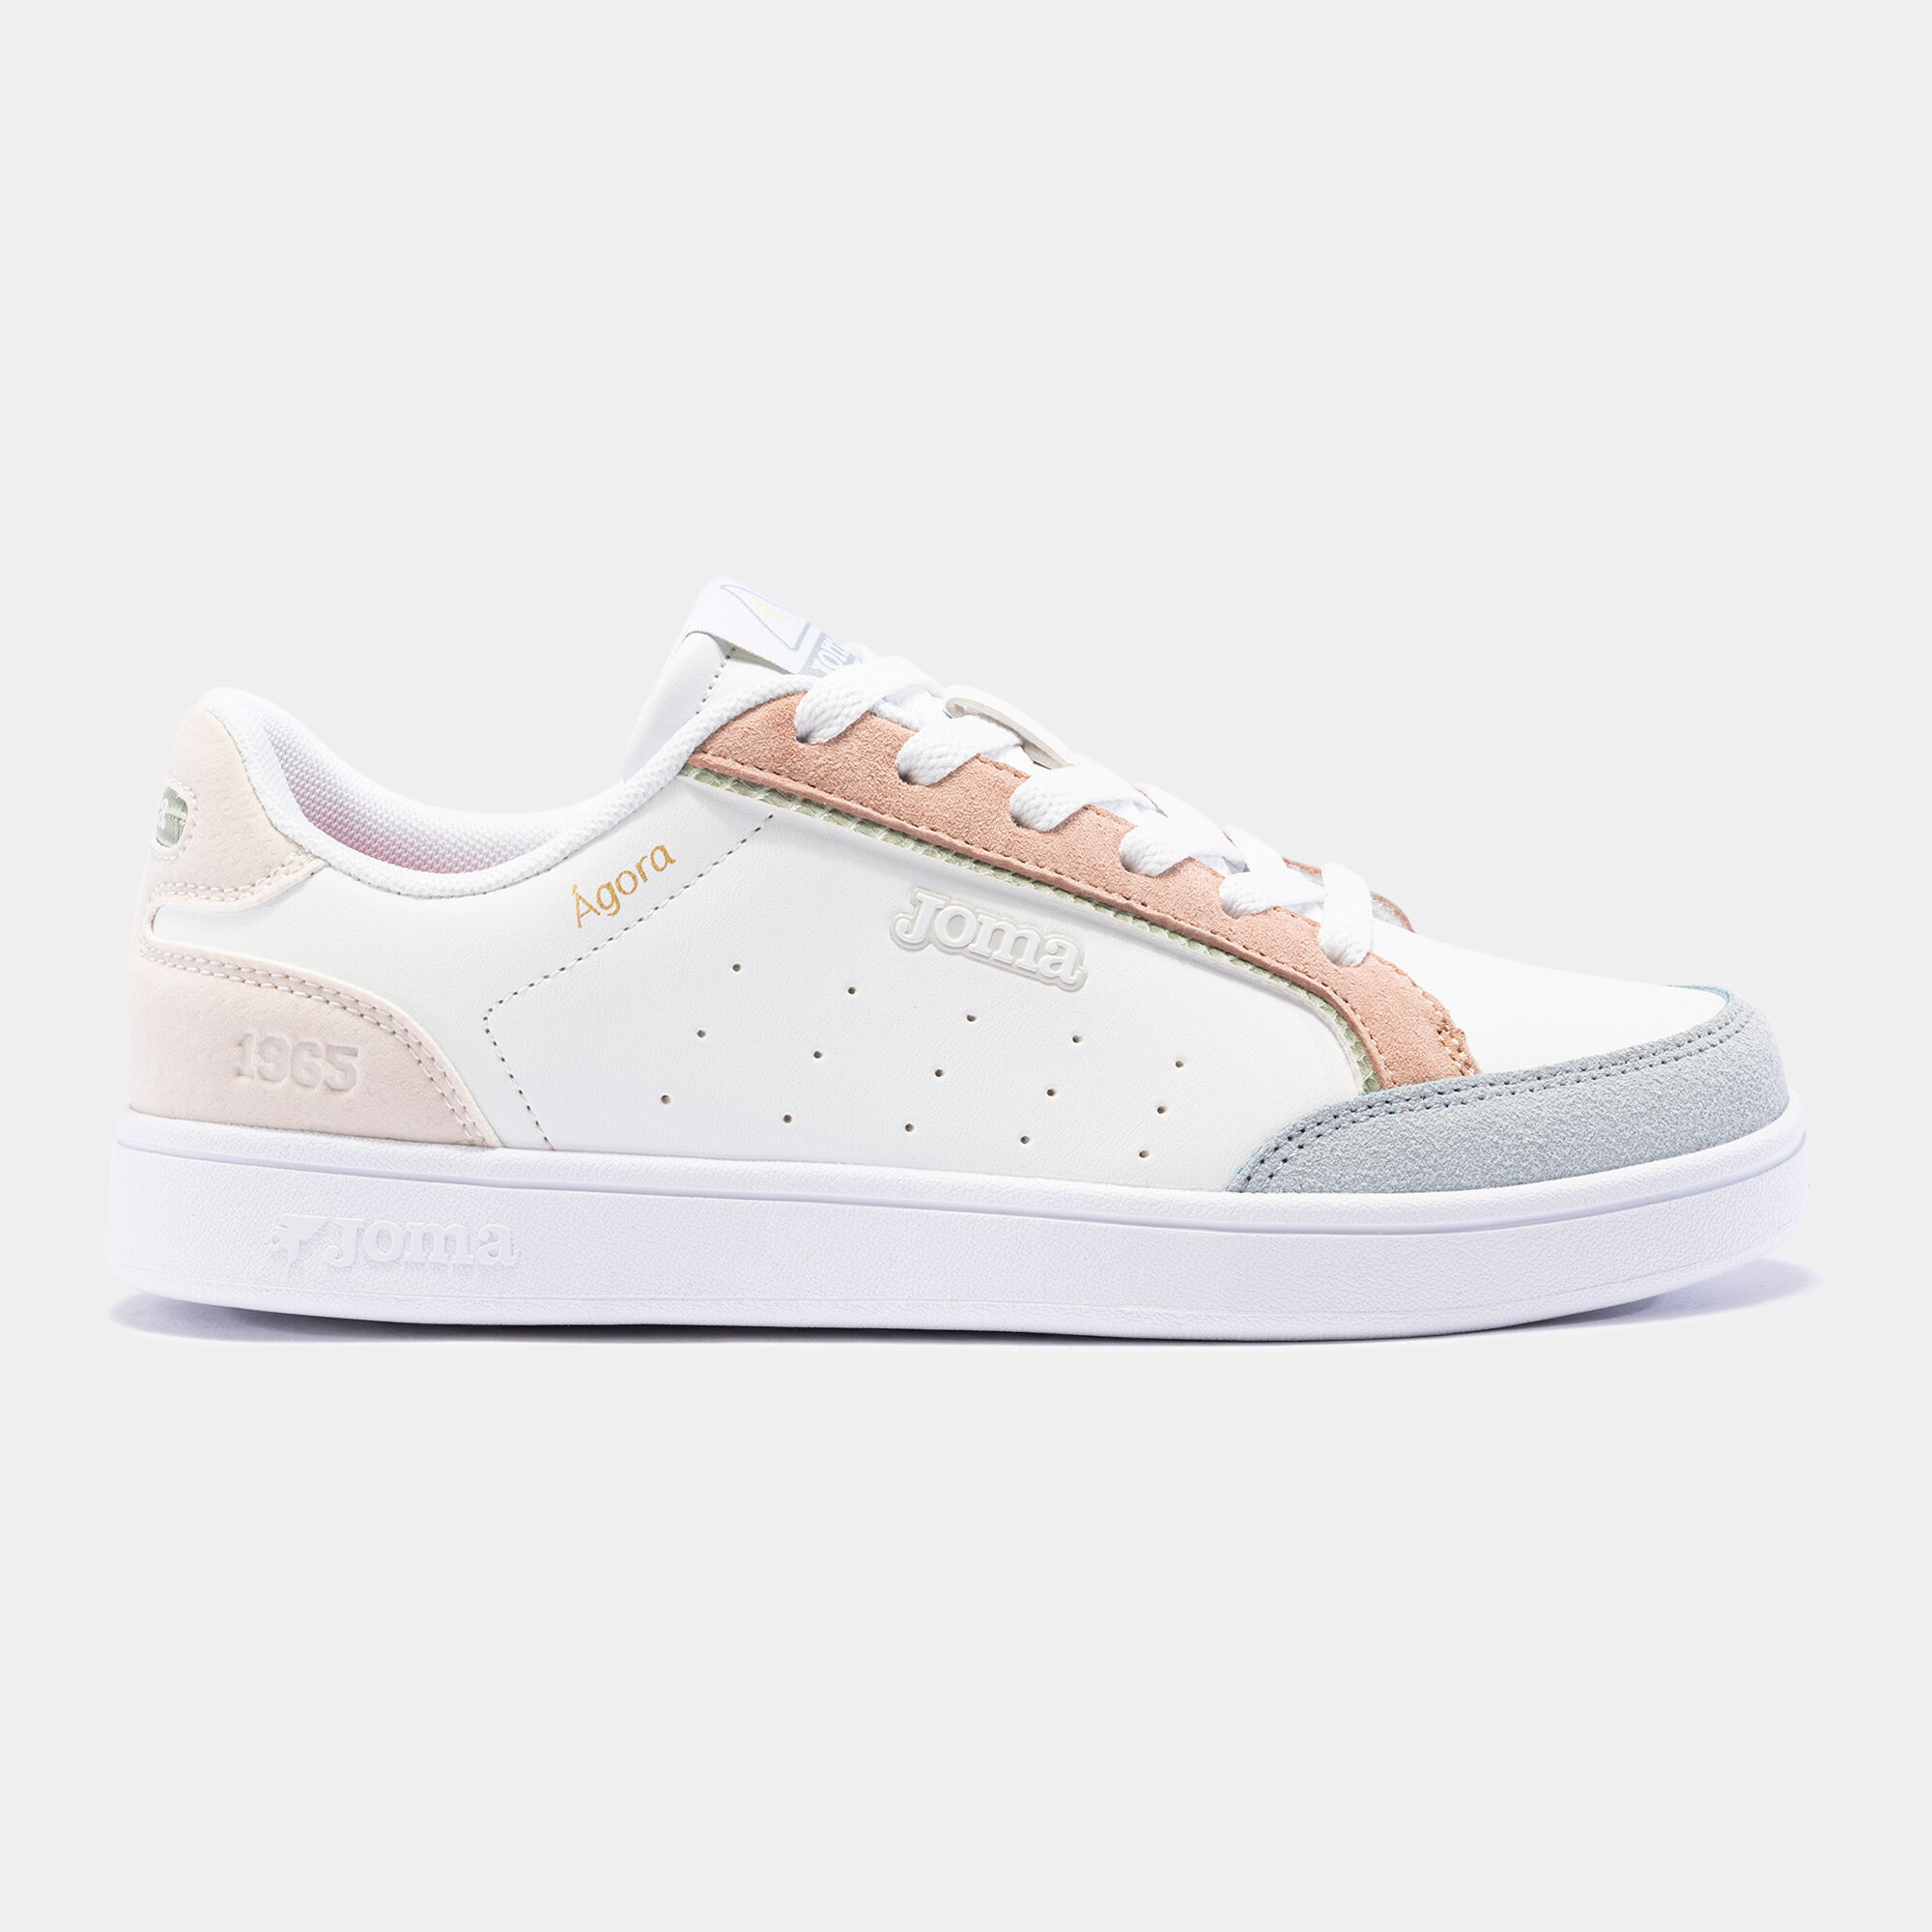 Casual shoes C.Agora Lady 24 woman white pink